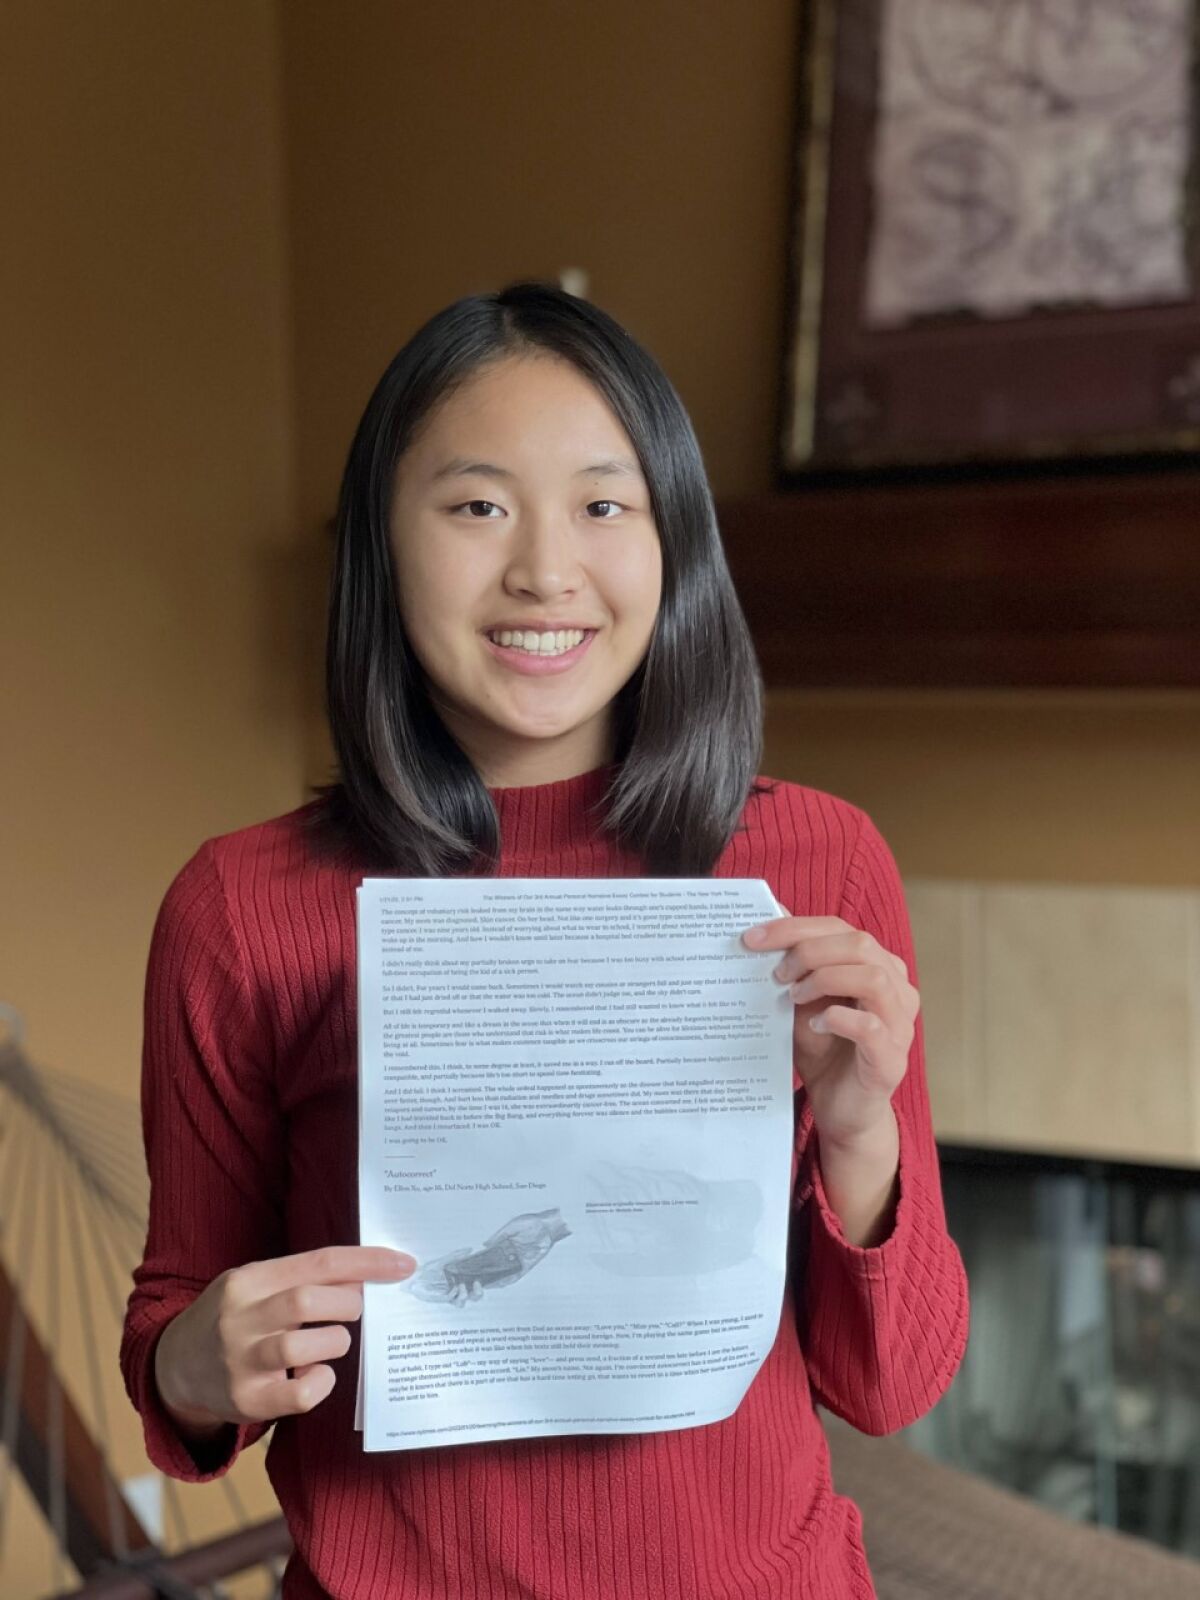 Del Norte student wins New York Times contest with essay on inperson